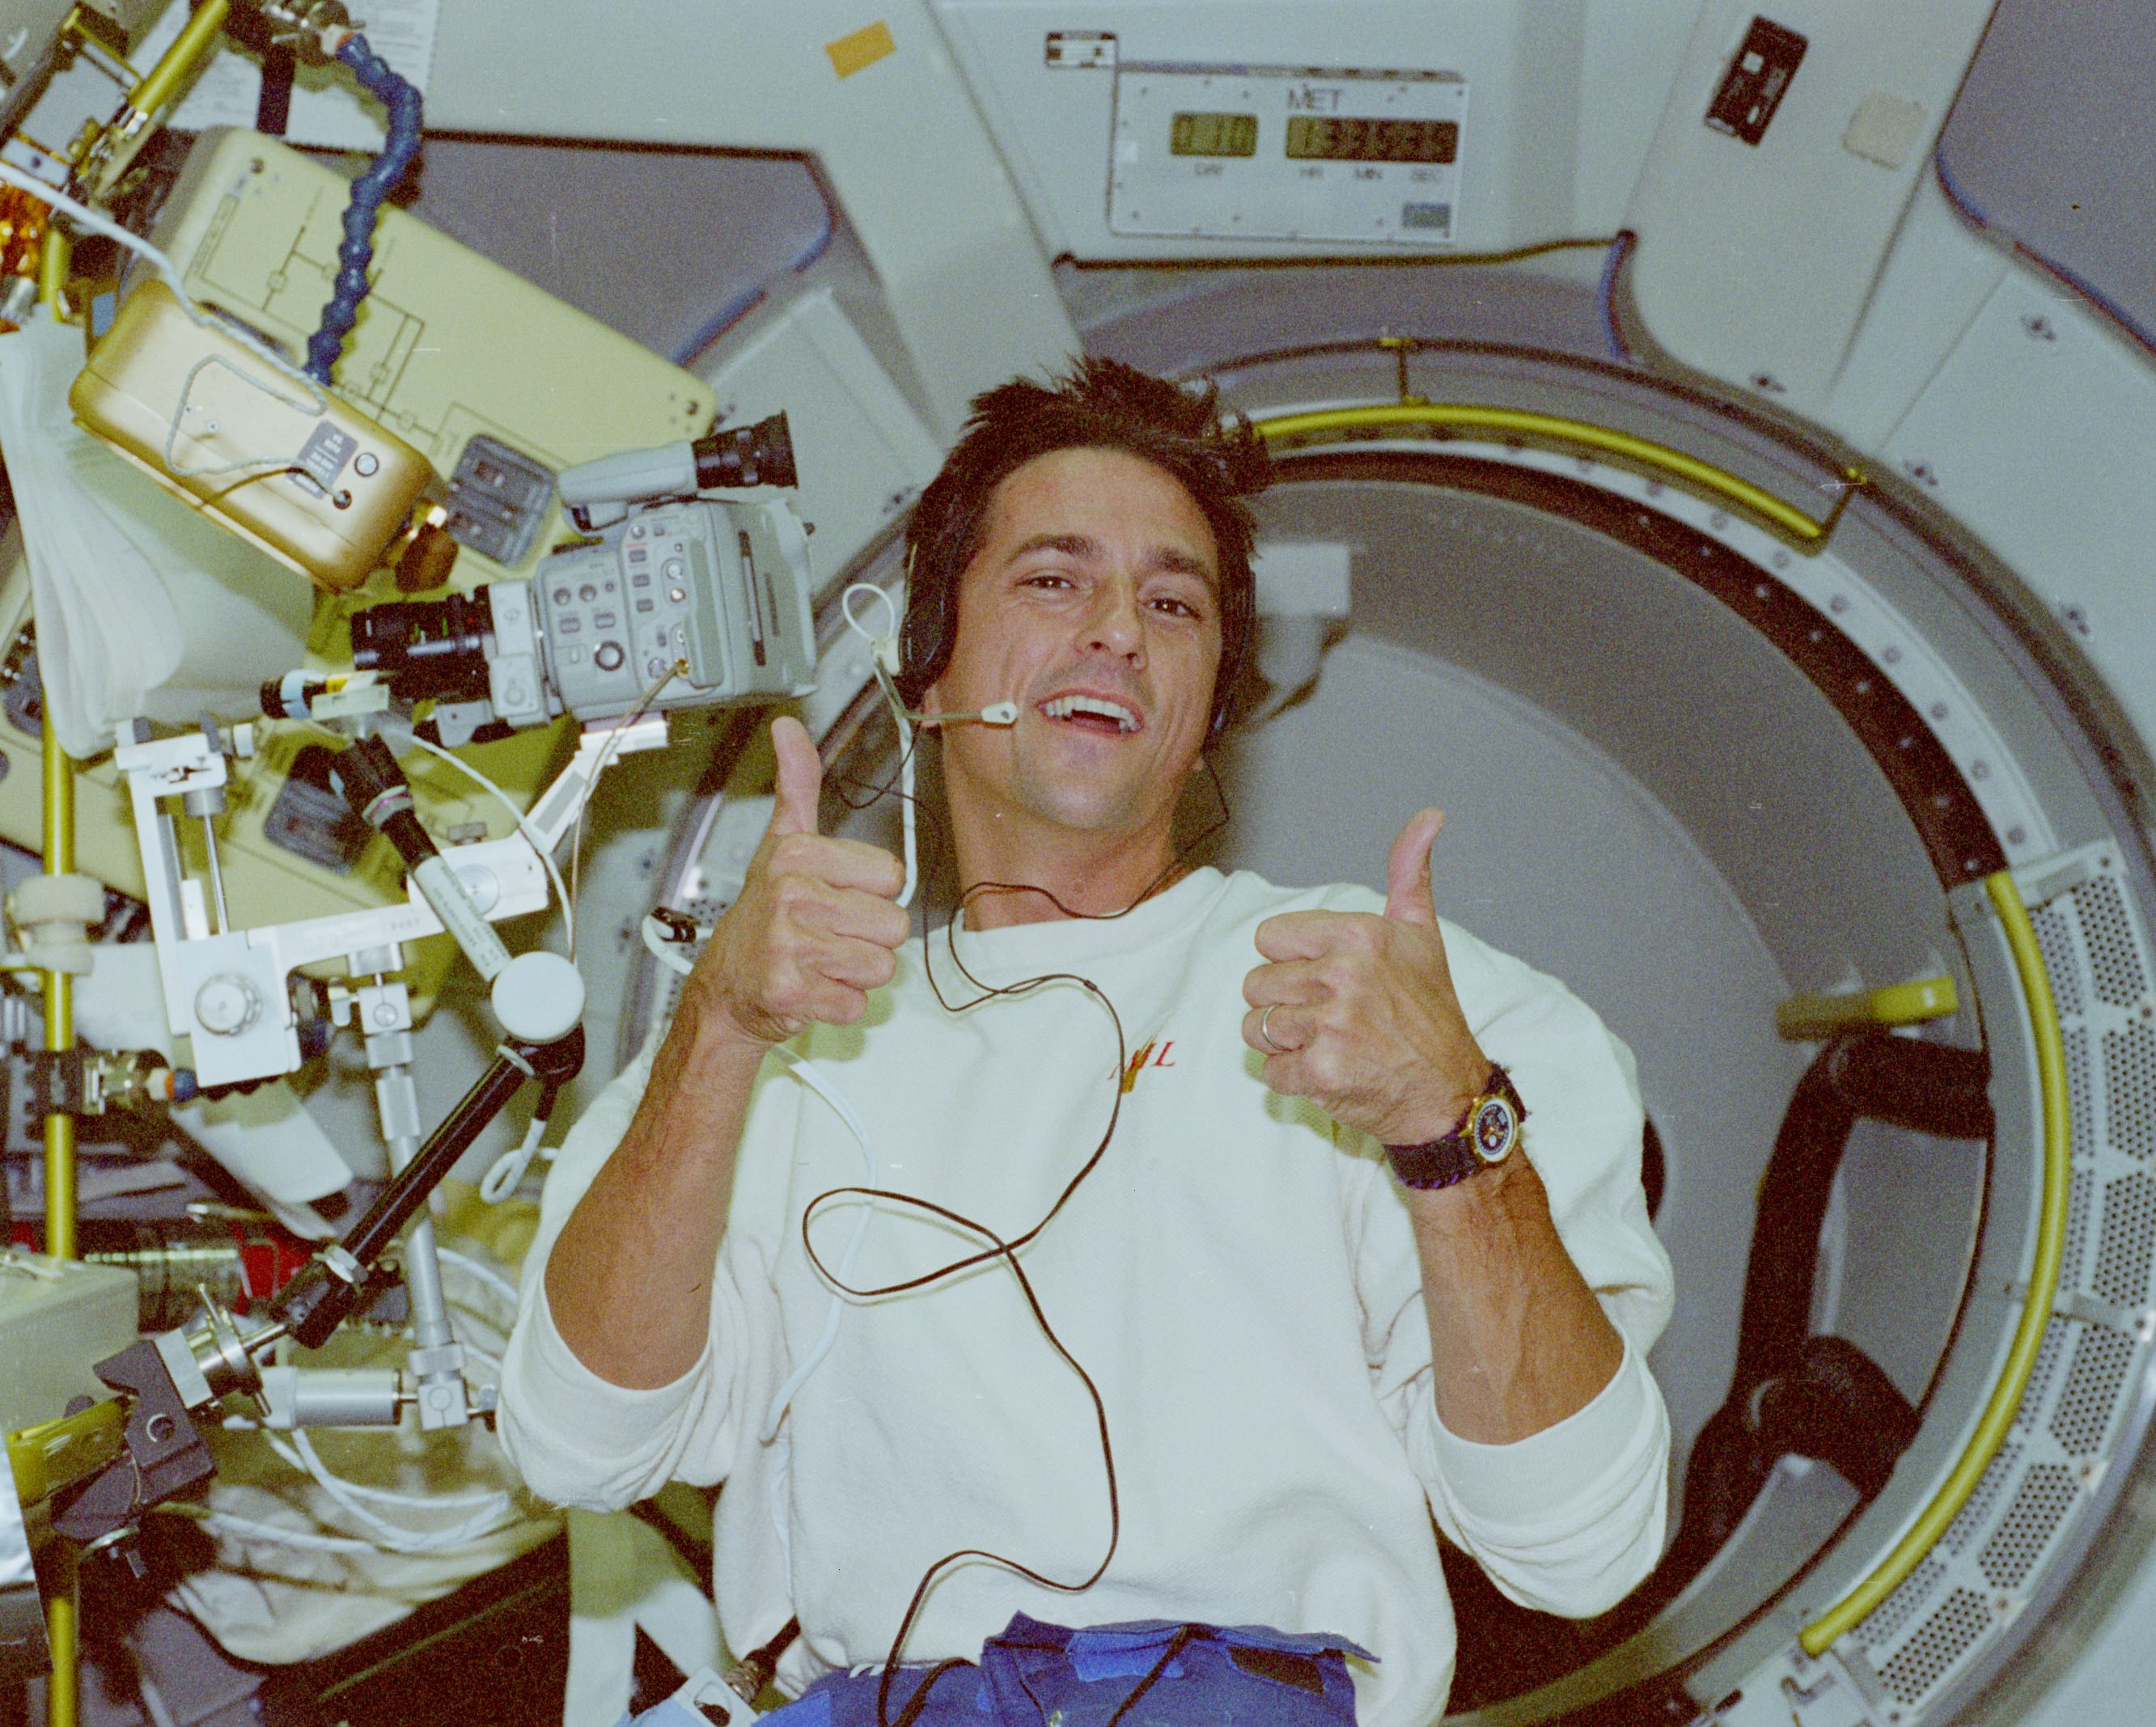 Donald A. Thomas gives two thumbs up for the crew's performance during the mission